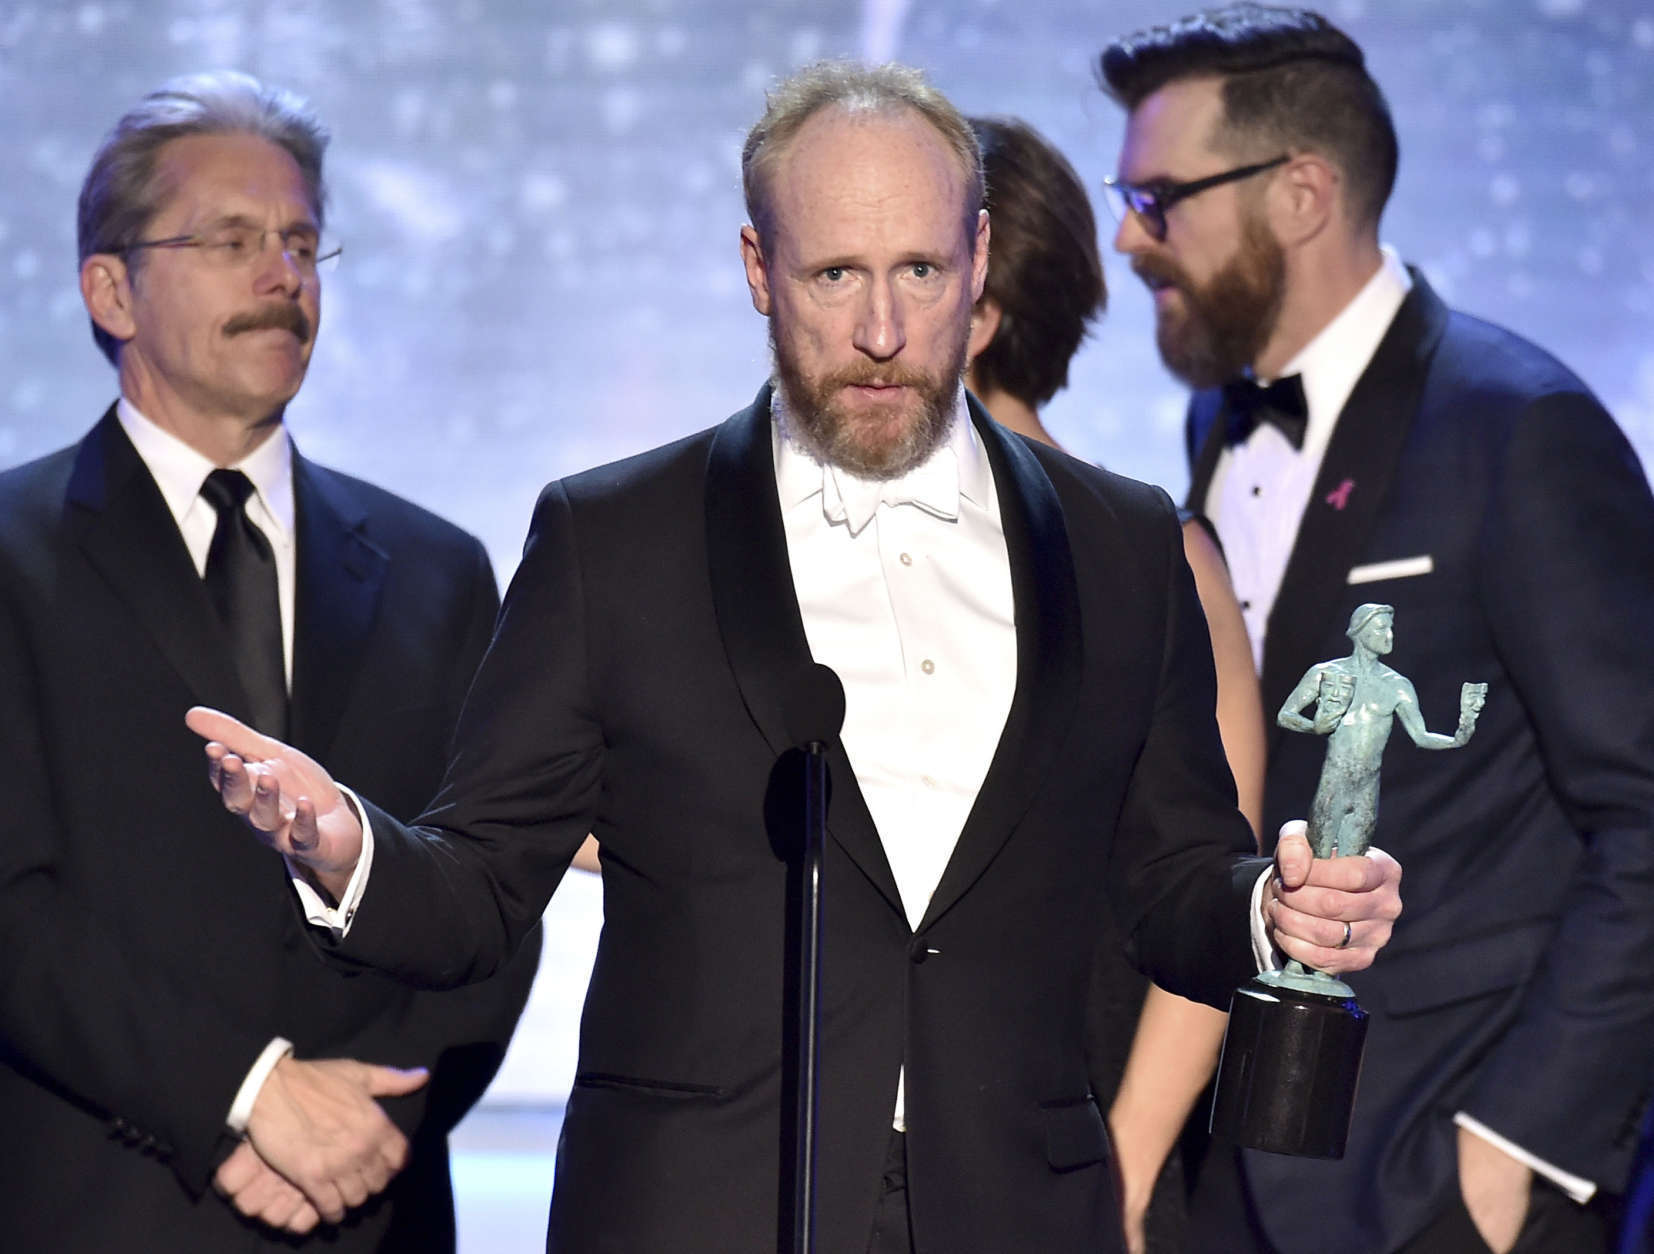 Matt Walsh accepts the award for outstanding ensemble in a comedy series for "Veep" at the 24th annual Screen Actors Guild Awards at the Shrine Auditorium &amp; Expo Hall on Sunday, Jan. 21, 2018, in Los Angeles. (Photo by Vince Bucci/Invision/AP)